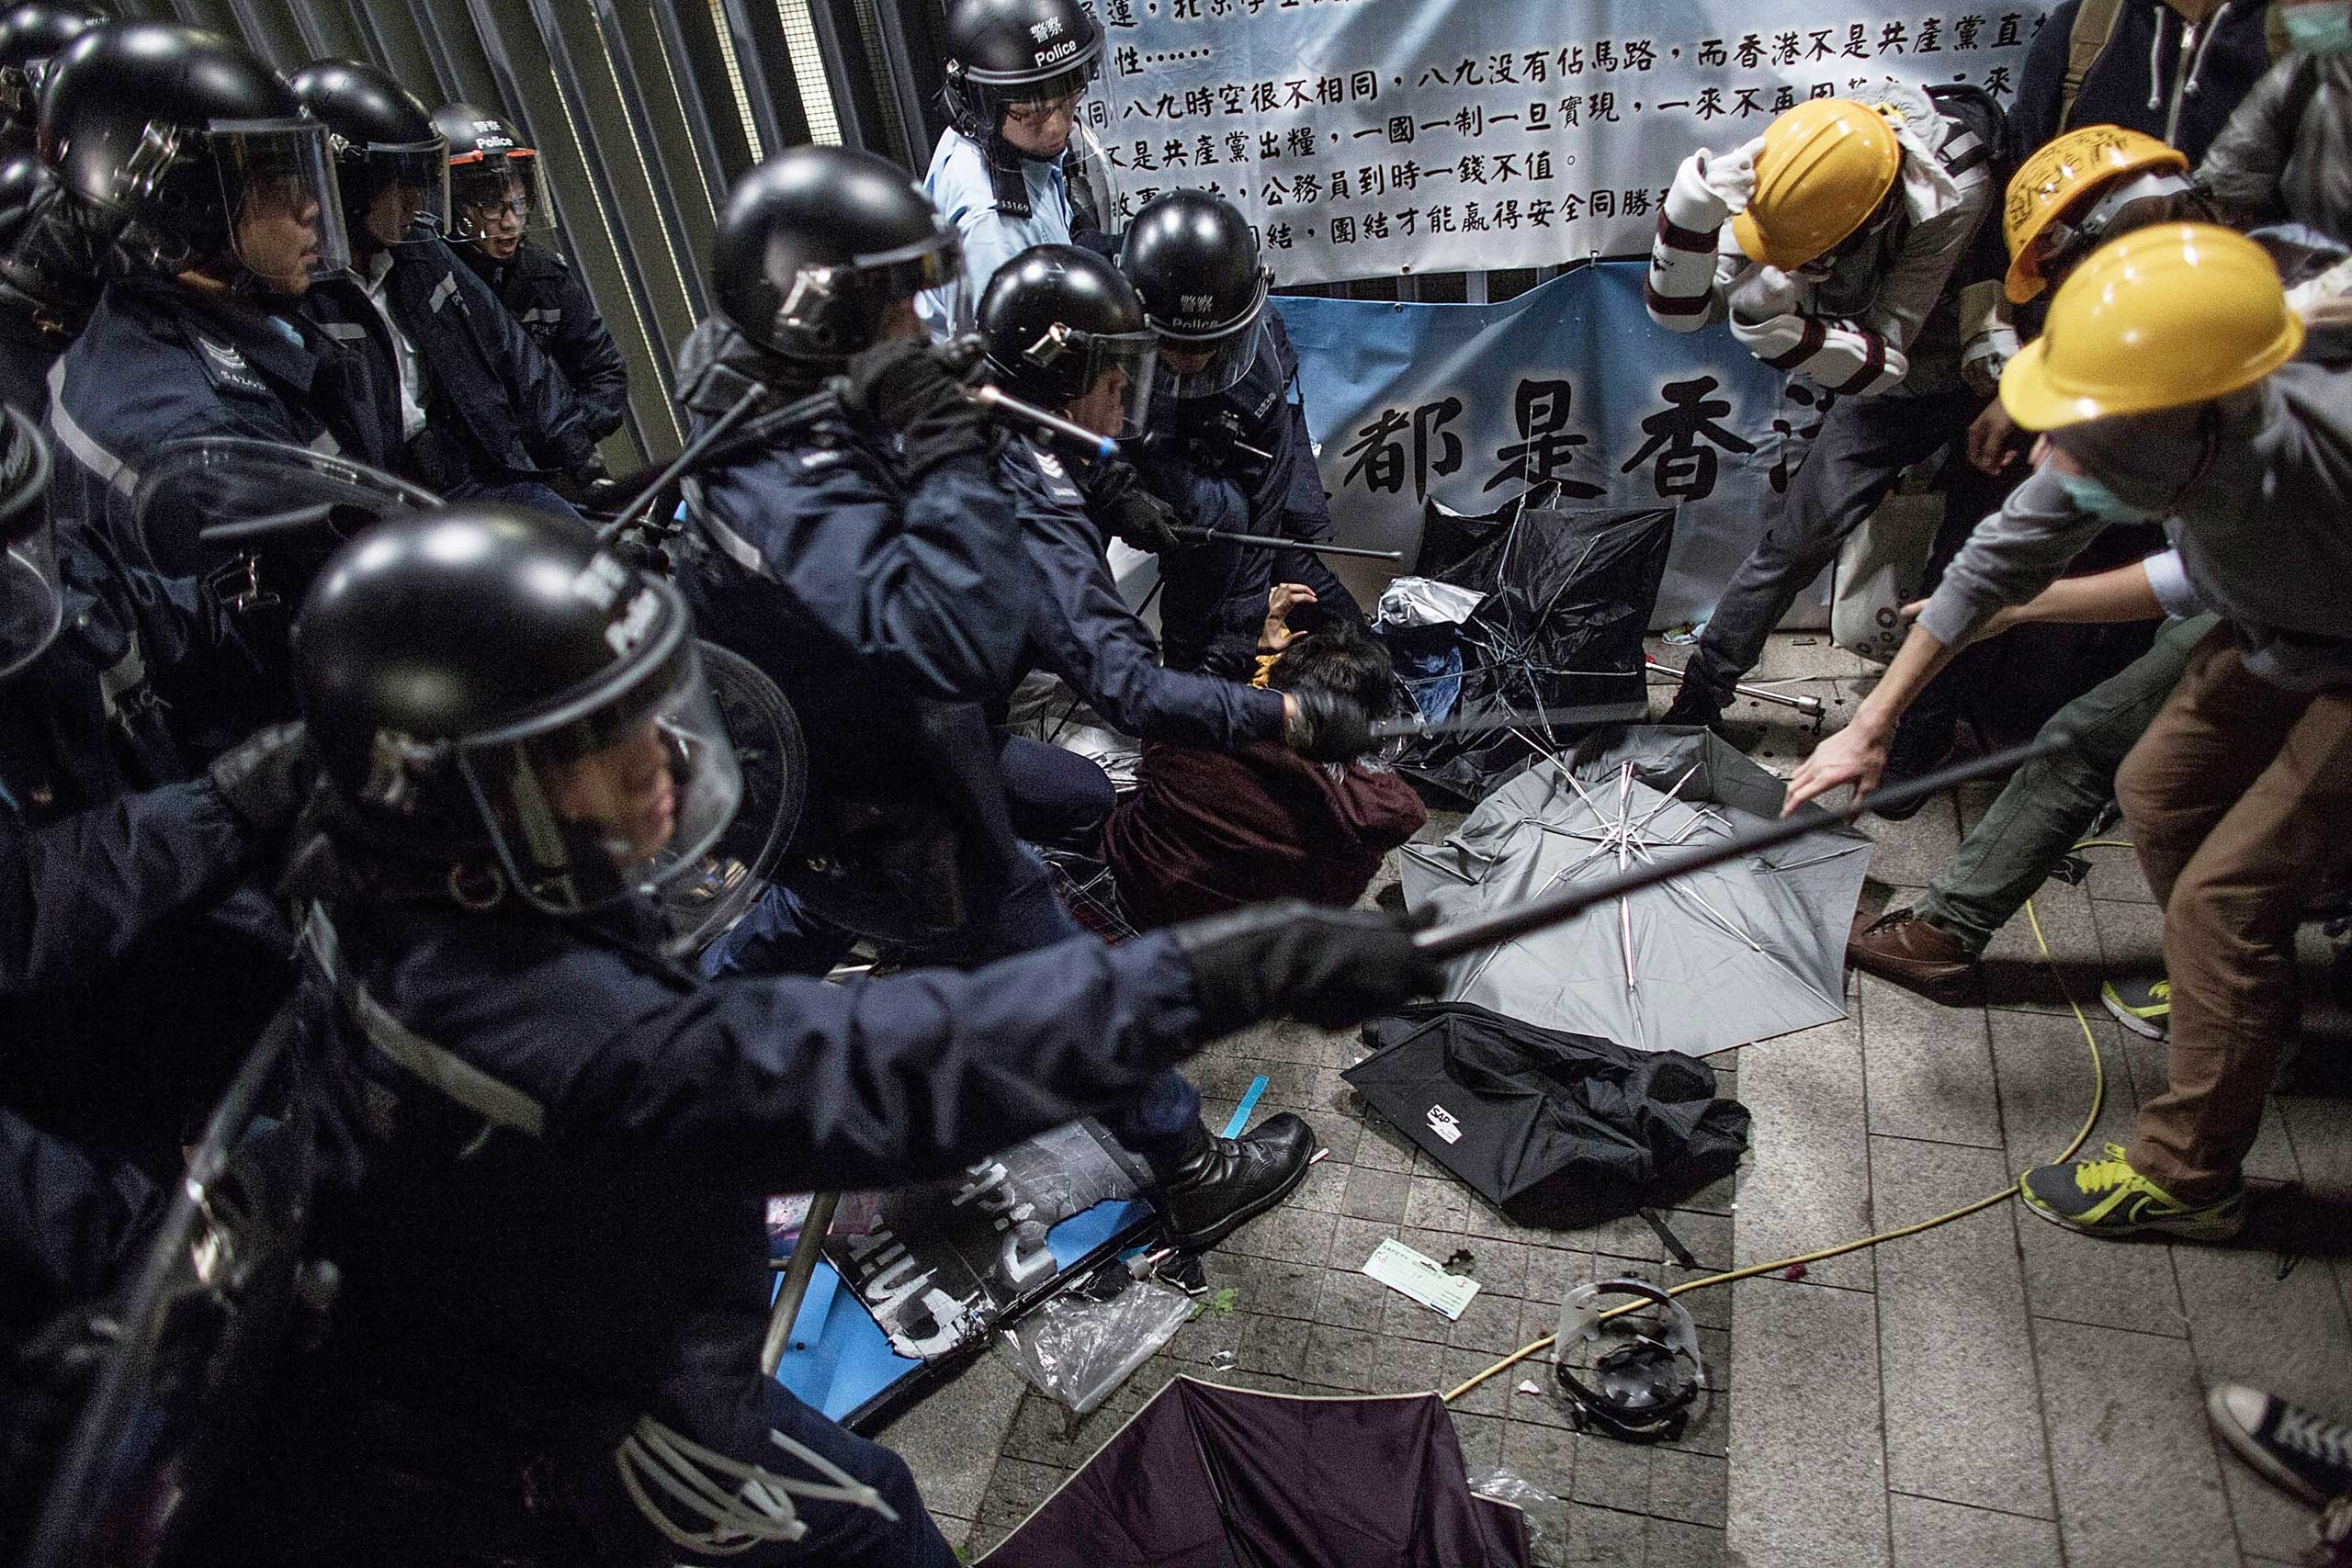 Police officers disperse pro-democracy protesters outside the Legislative Council building after clashes with pro-democracy activists on Nov. 19, 2014 in Hong Kong.